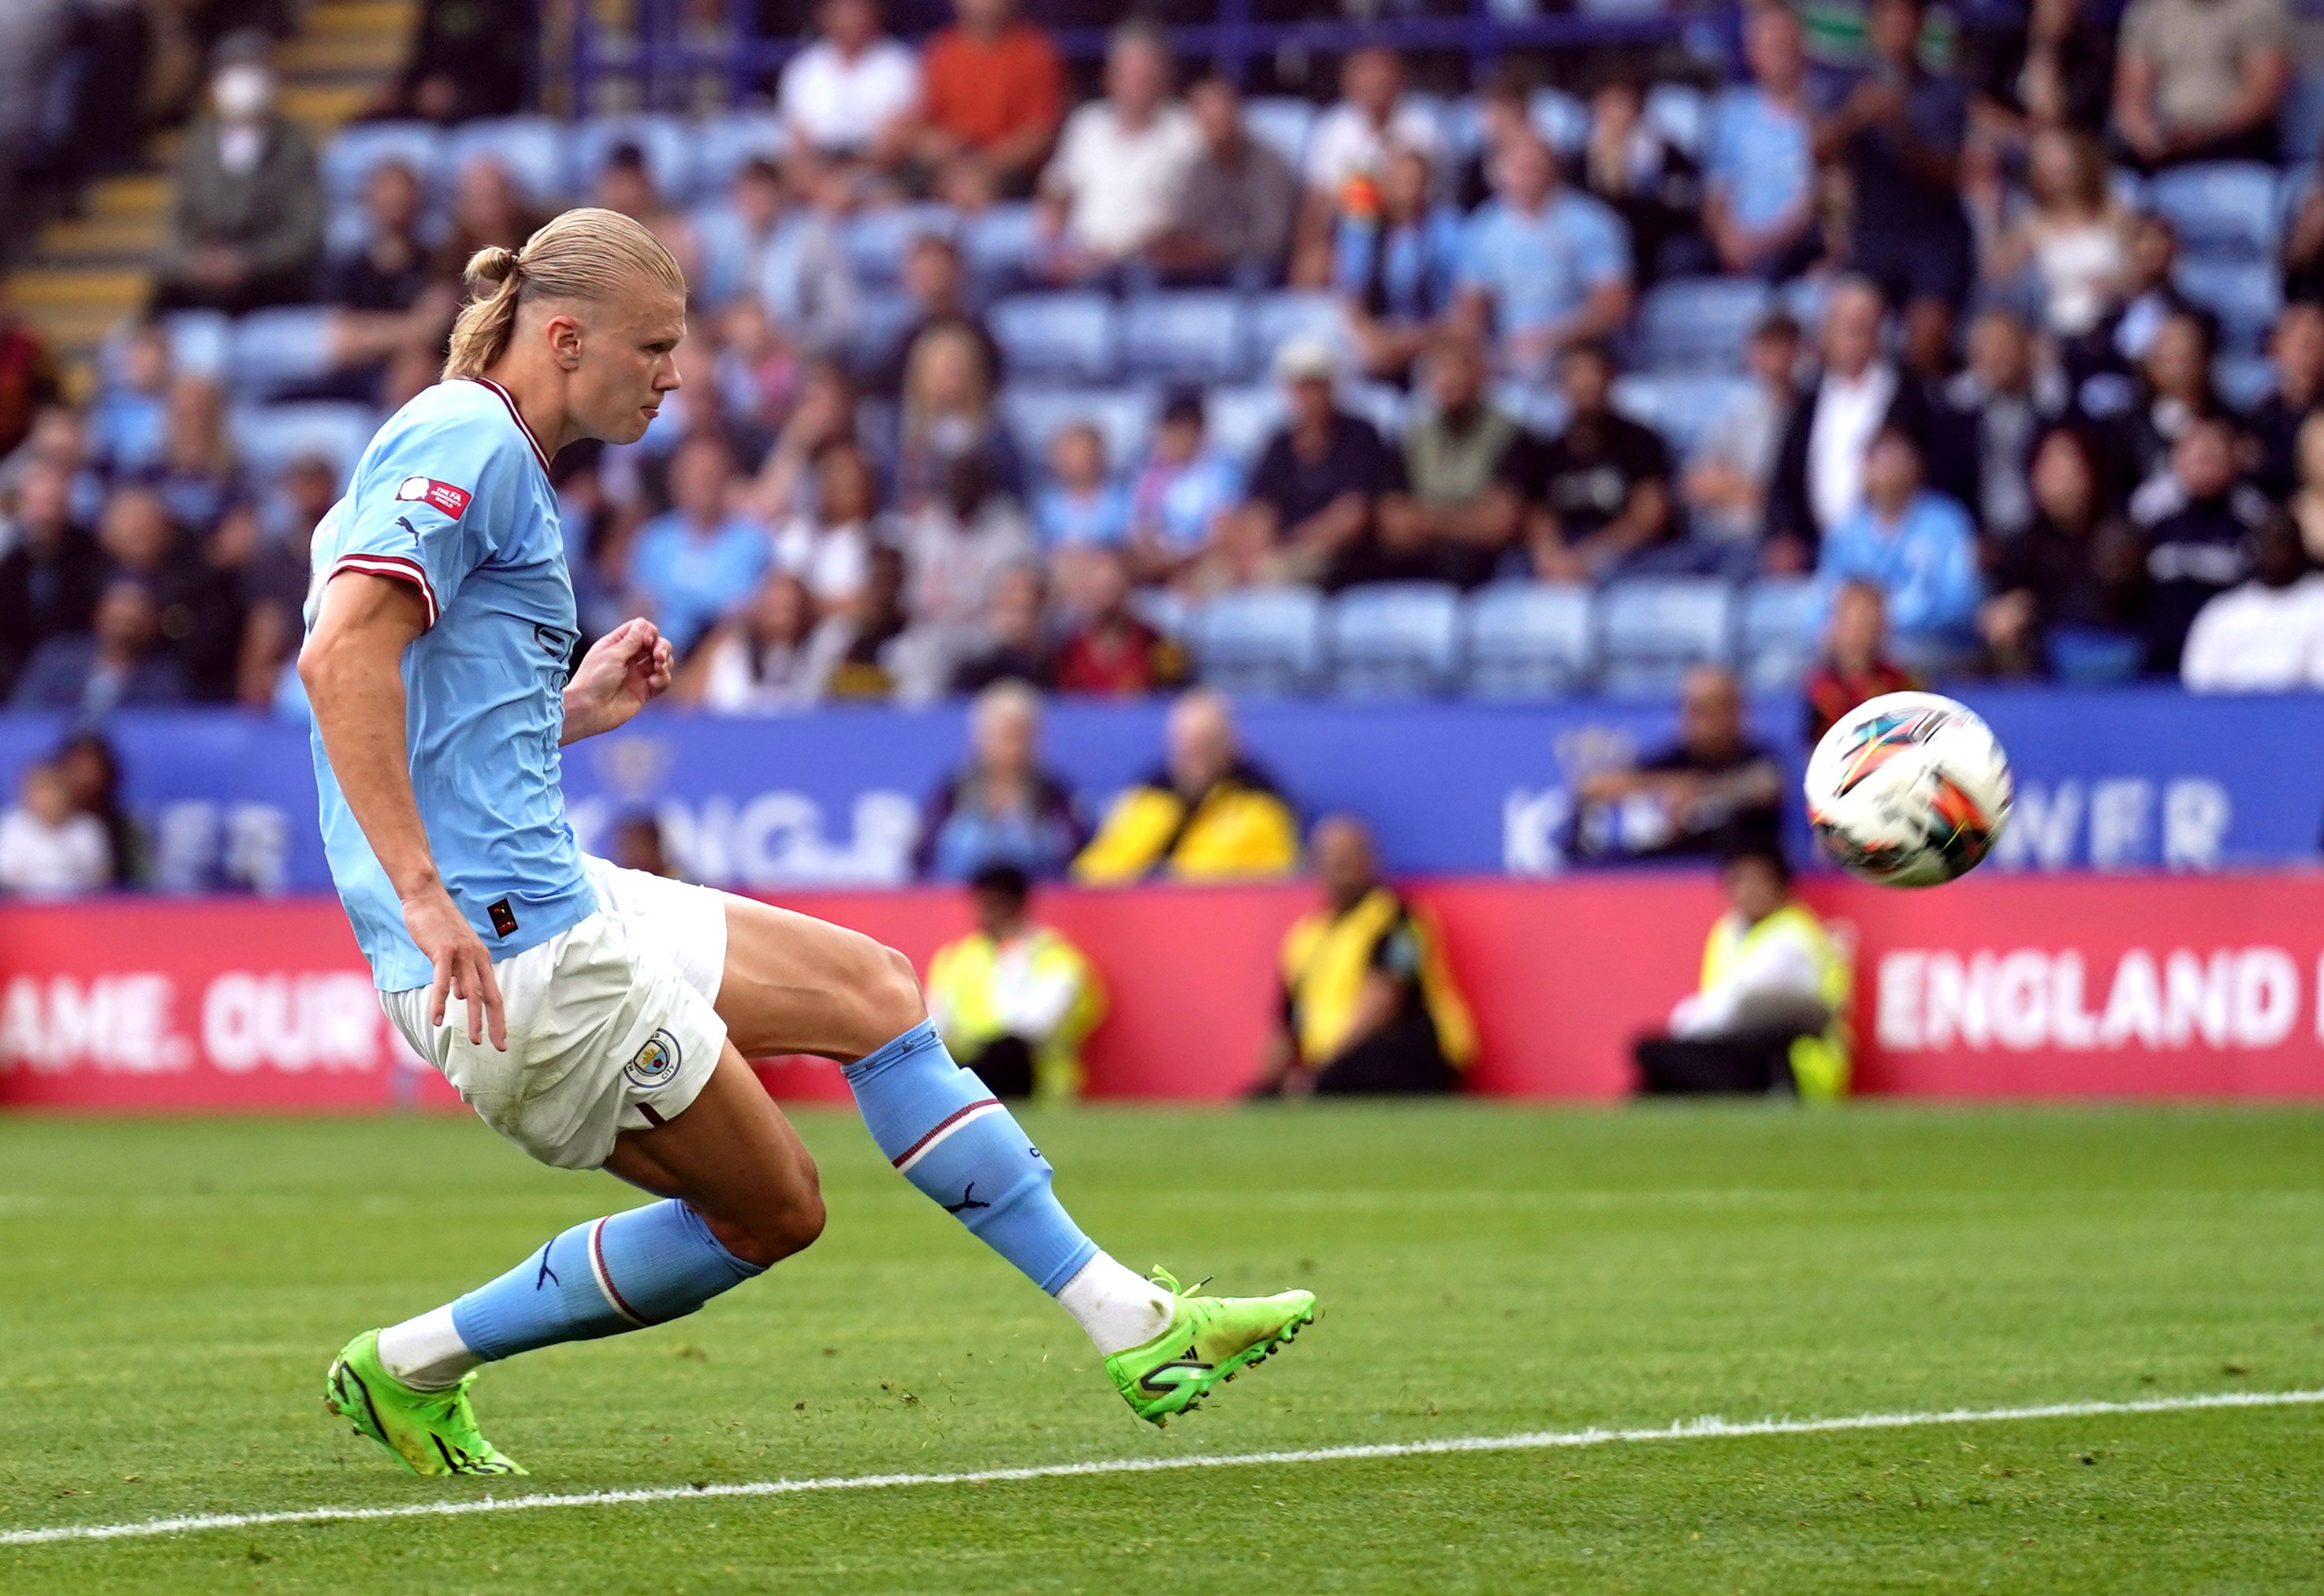 Manchester City’s Erling Haaland attempts a shot on goal during the Community Shield game against Liverpool. Photo: DPA